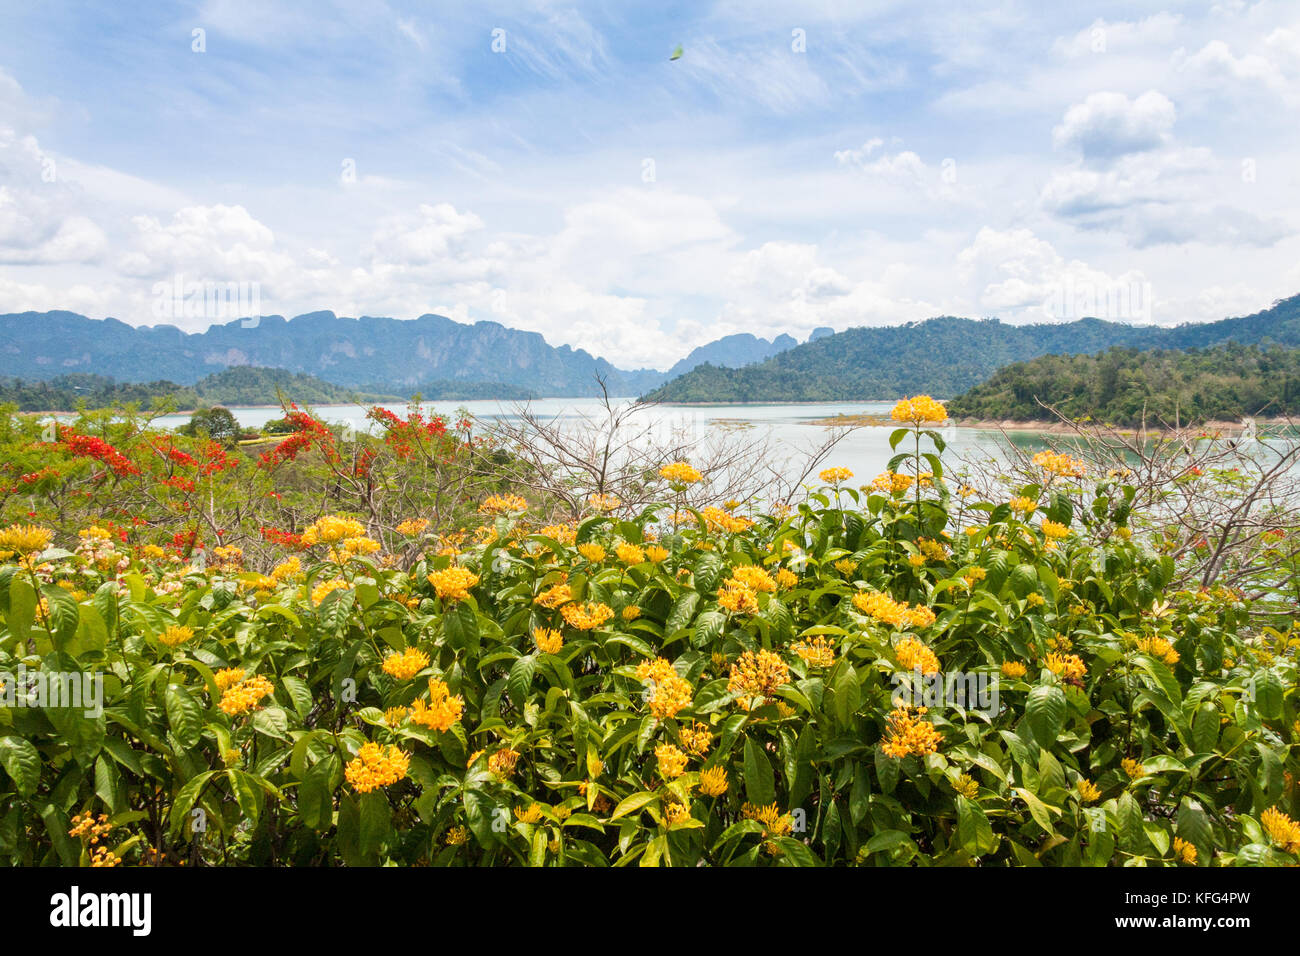 Yellow flowers and view over Ratchaprapha Dam, Khao Sok, Surat Thani